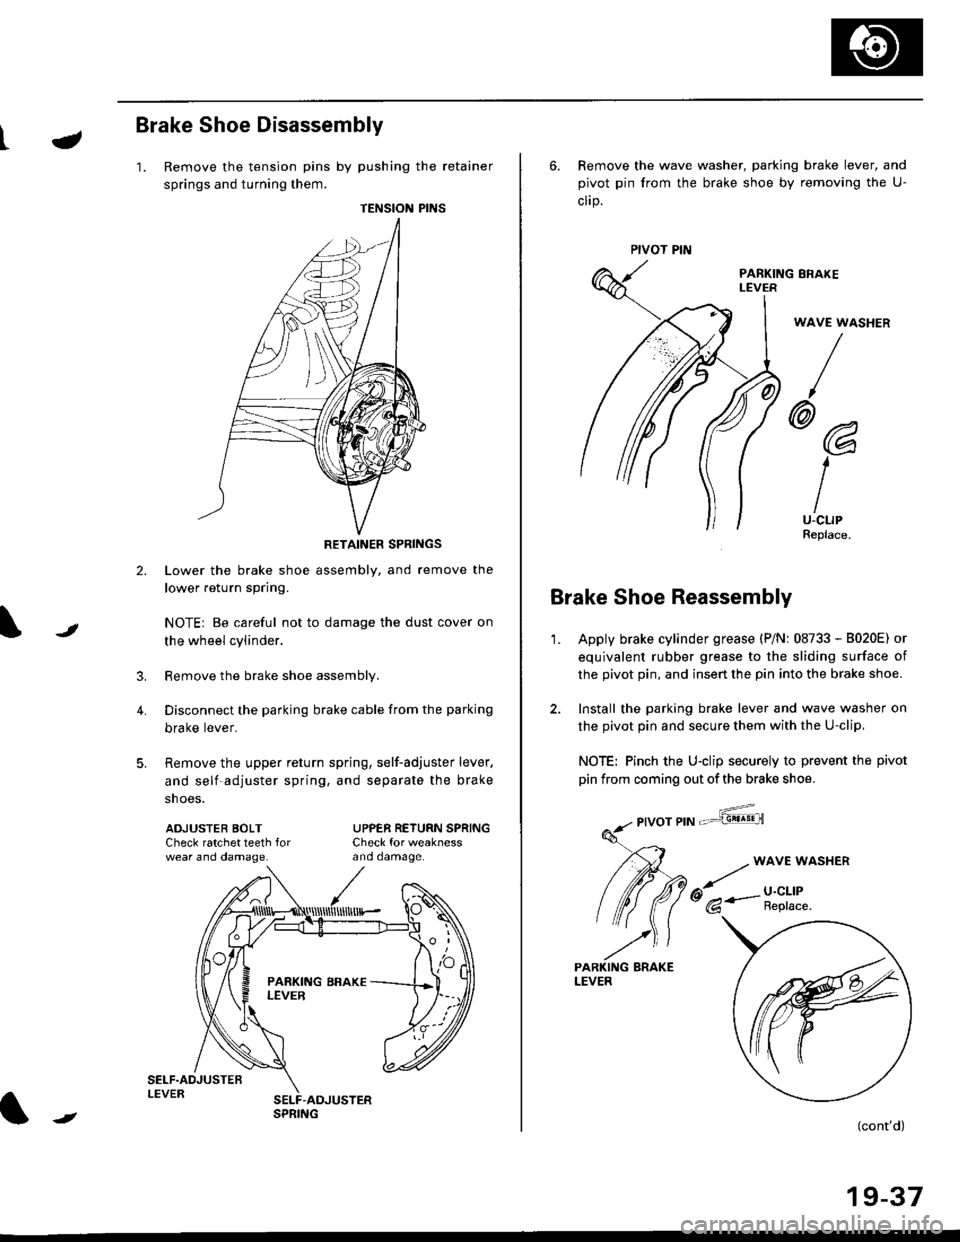 HONDA CIVIC 1996 6.G Service Manual t-
Brake Shoe Disassembly
1. Remove the tension pins by pushing the retainer
springs and turning them.
TENSION PINS
RETAINER SPRINGS
Lower the brake shoe assembly, and remove the
lower return spring.
